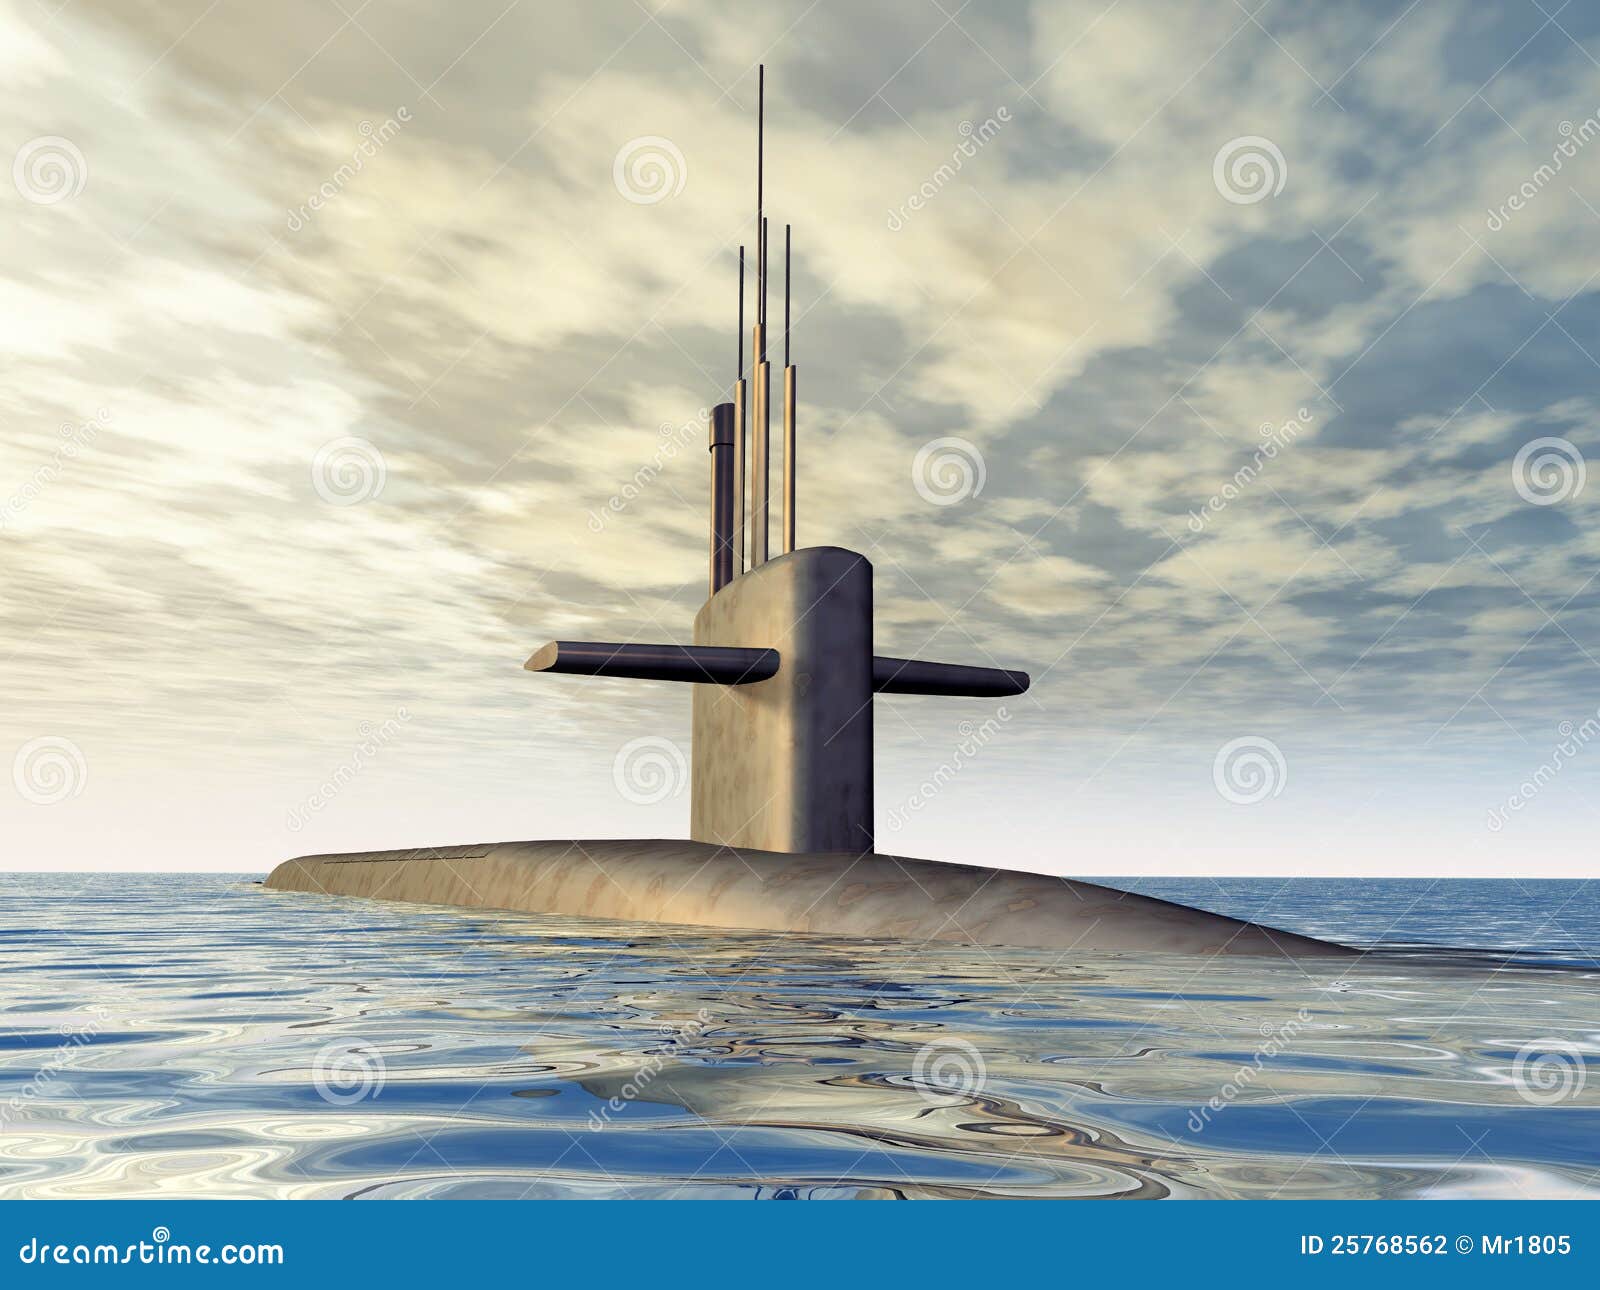 Modern Submarine. Computer generated 3D illustration with ocean and submarine